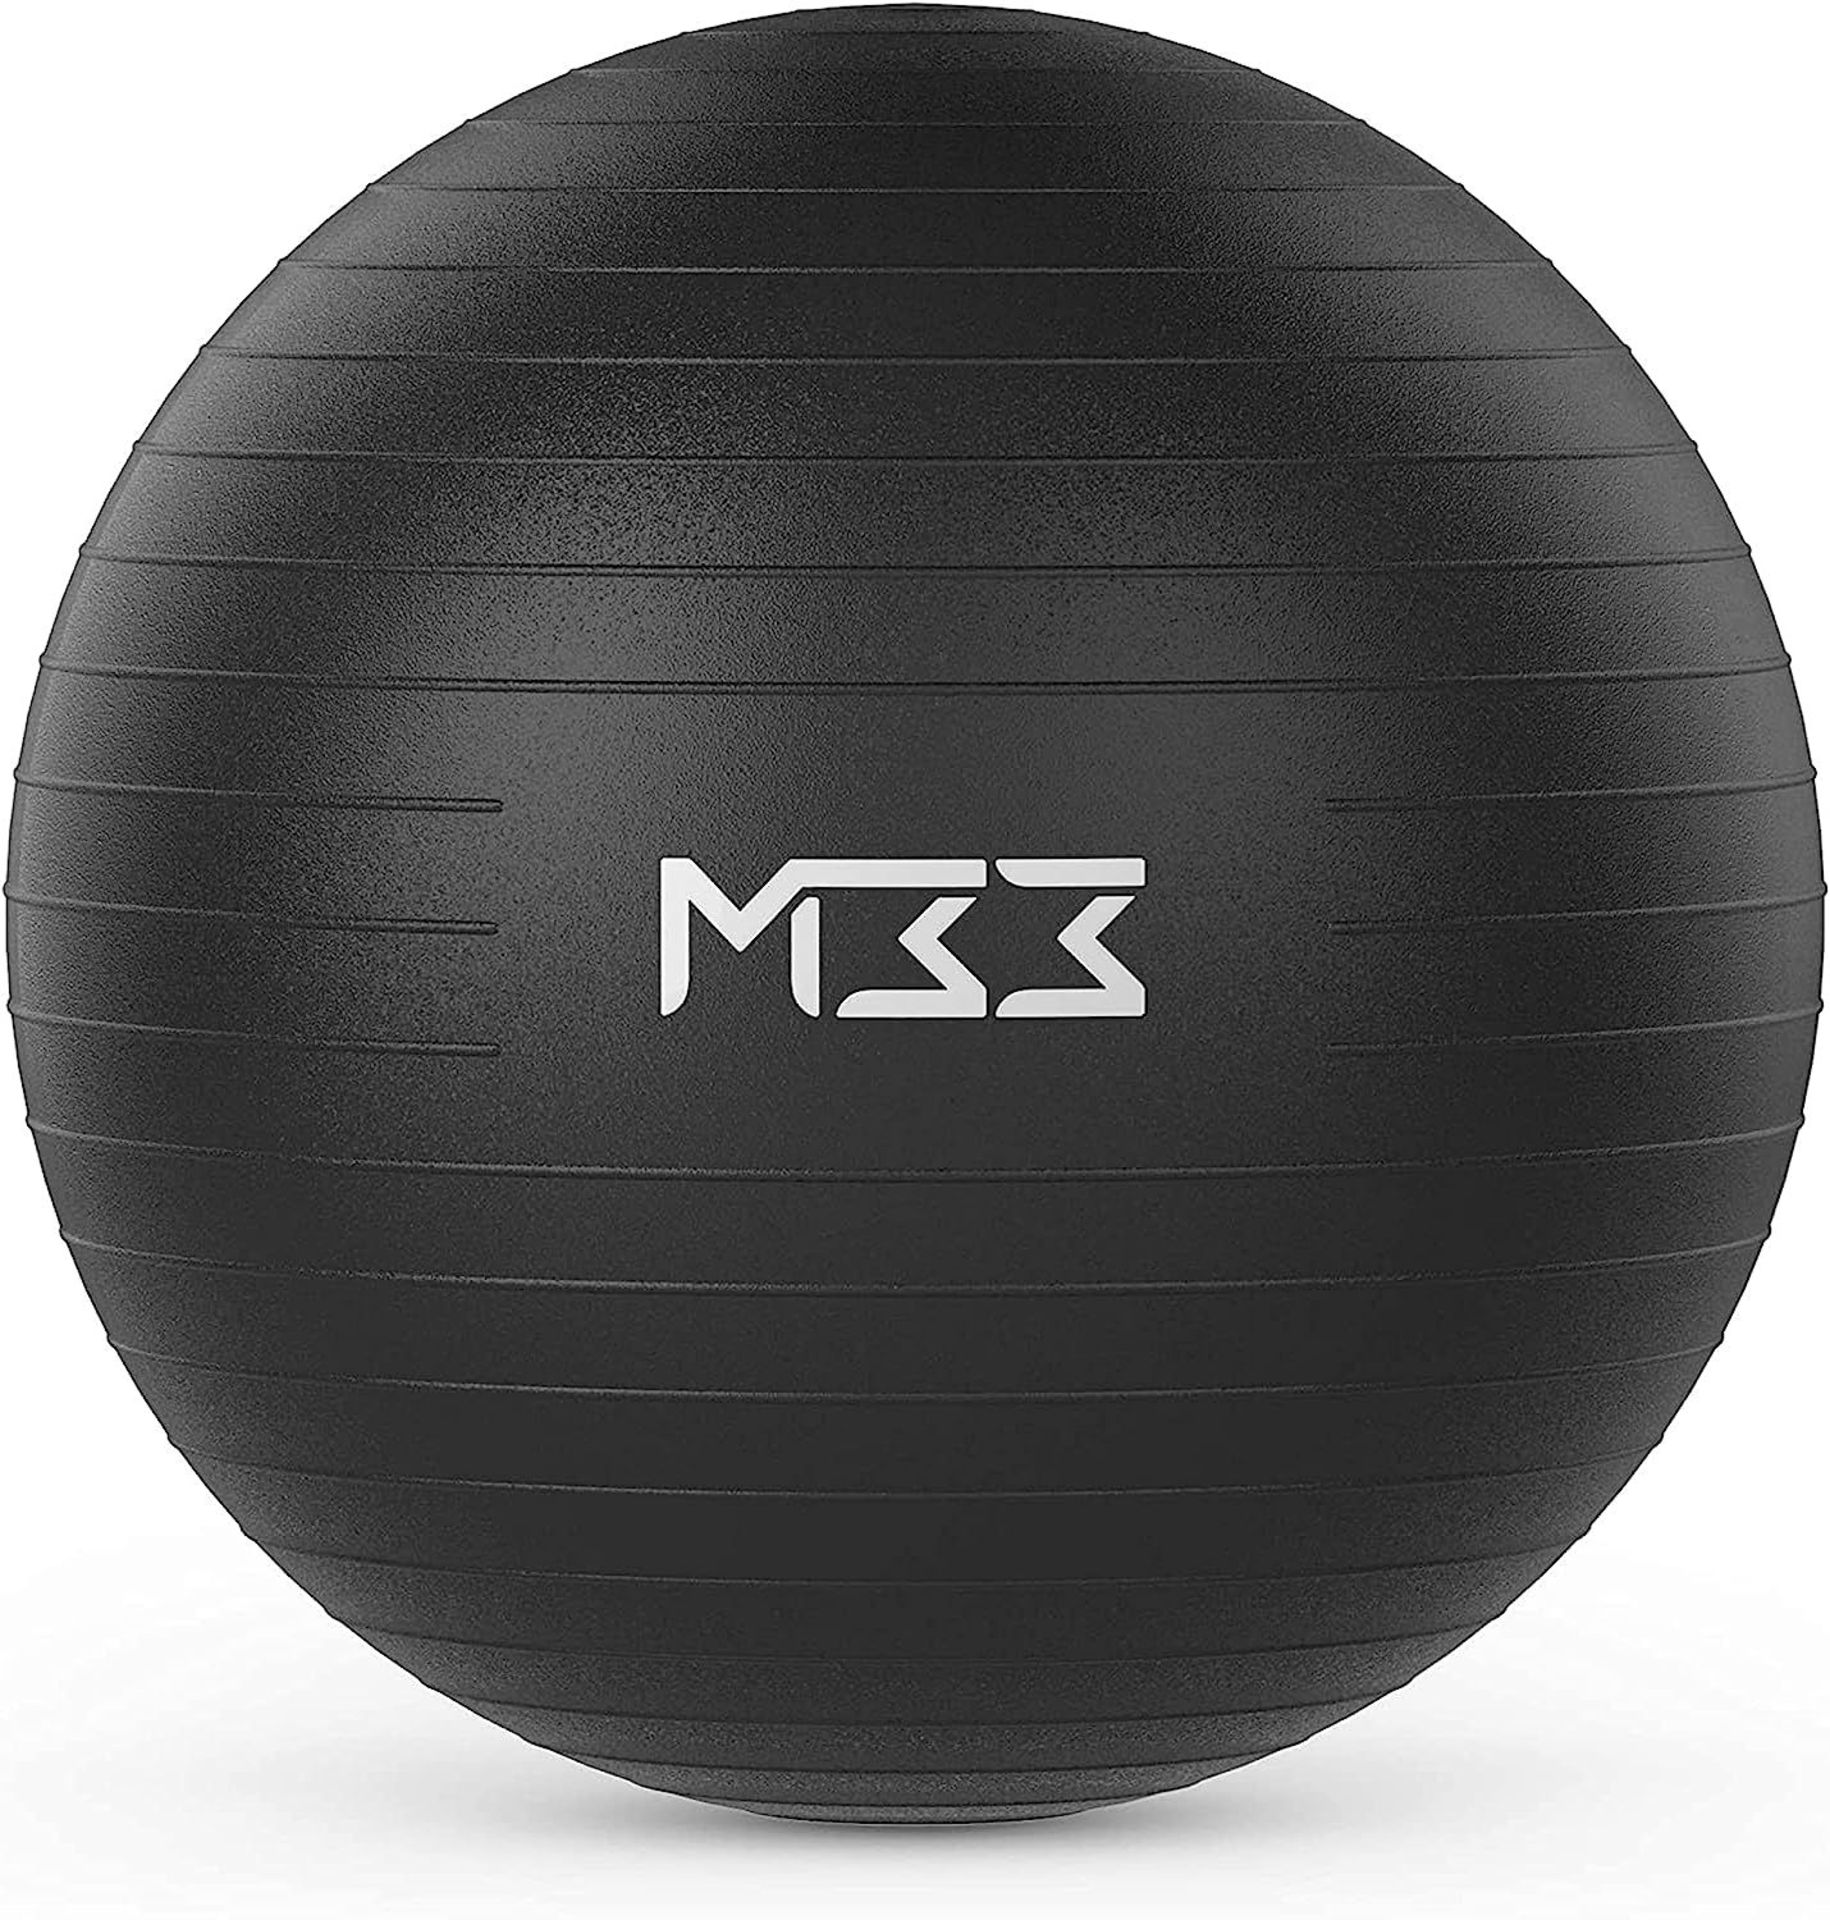 10 x Mode33 Exercise / Yoga / Pregnancy Ball - 55cm (NEW) - RRP £169.90 ! - Image 8 of 11